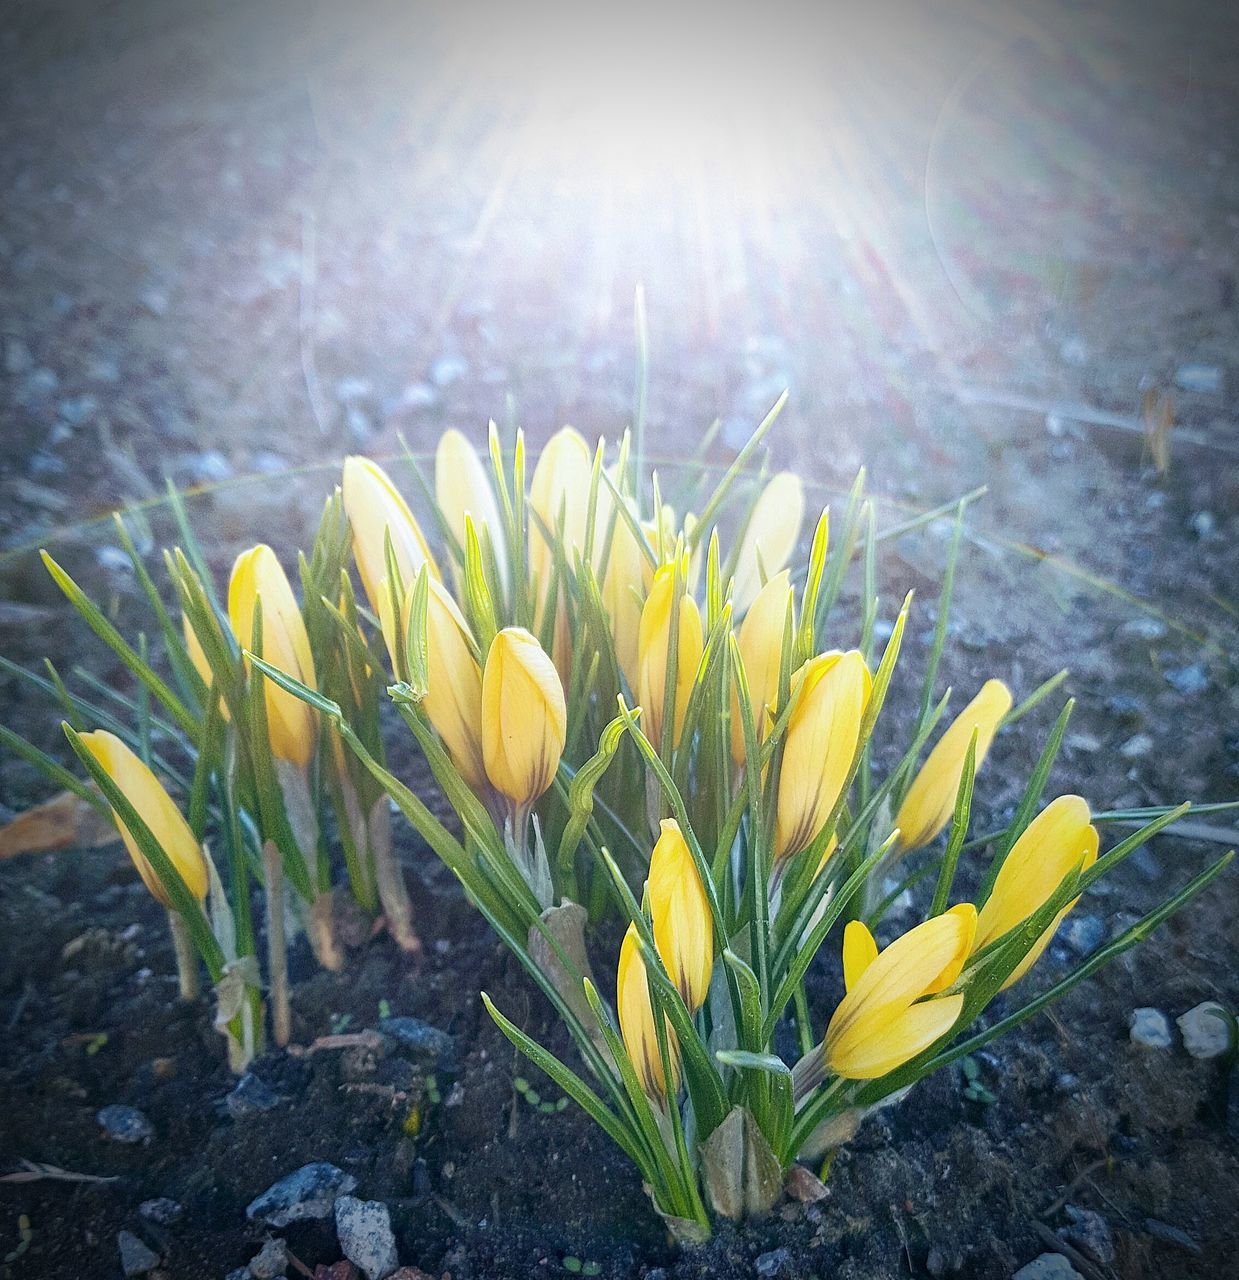 flower, flowering plant, plant, freshness, vulnerability, fragility, beauty in nature, growth, nature, close-up, petal, flower head, inflorescence, yellow, day, no people, sunlight, land, field, botany, springtime, outdoors, crocus, iris, soft focus, spring